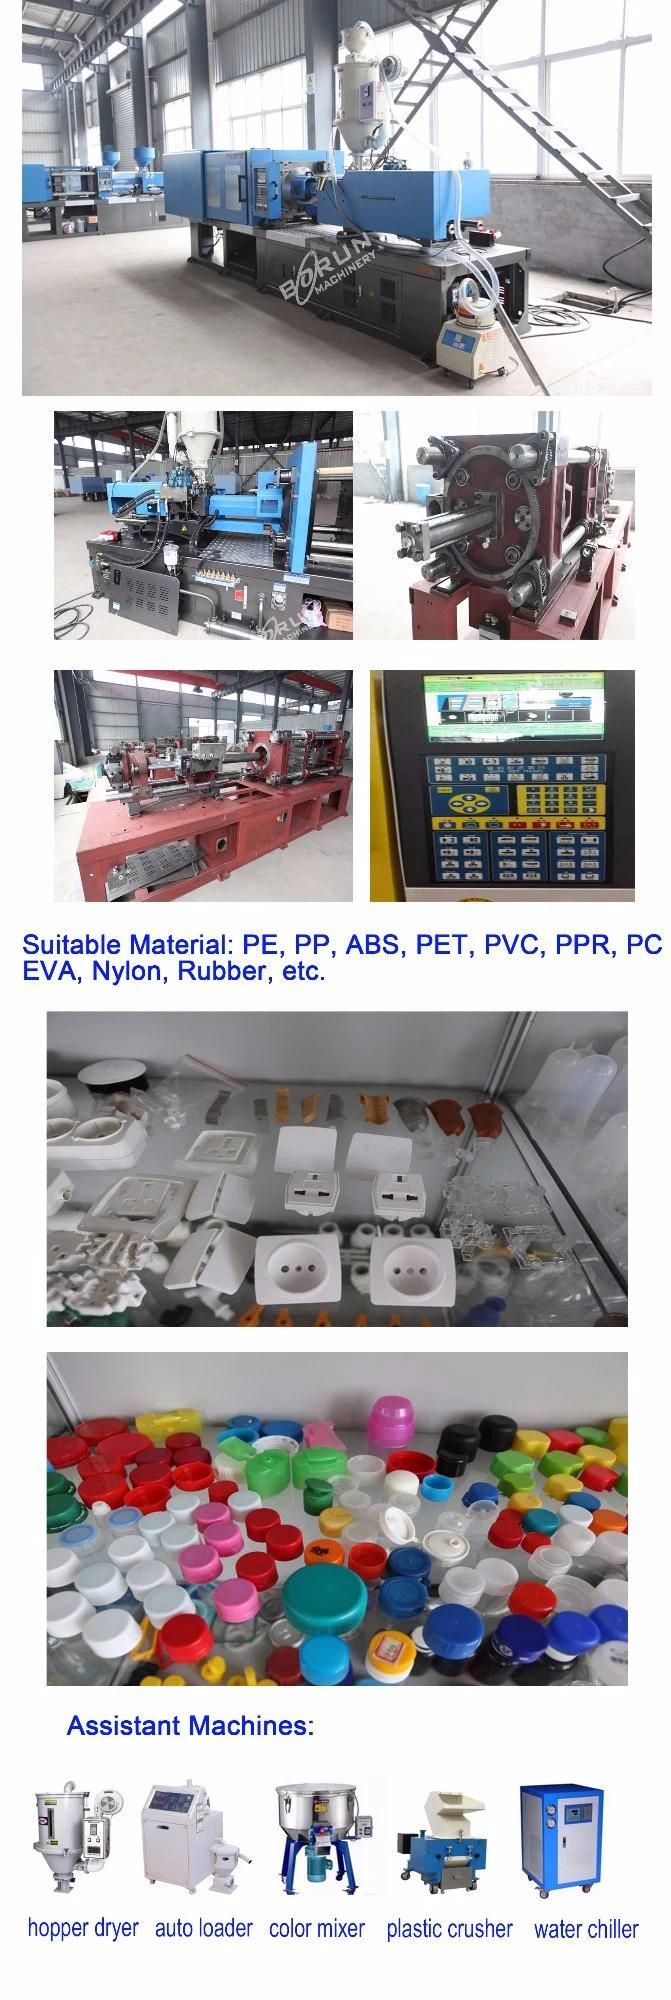 PVC Pipe Fittings Injection Moulding Machine